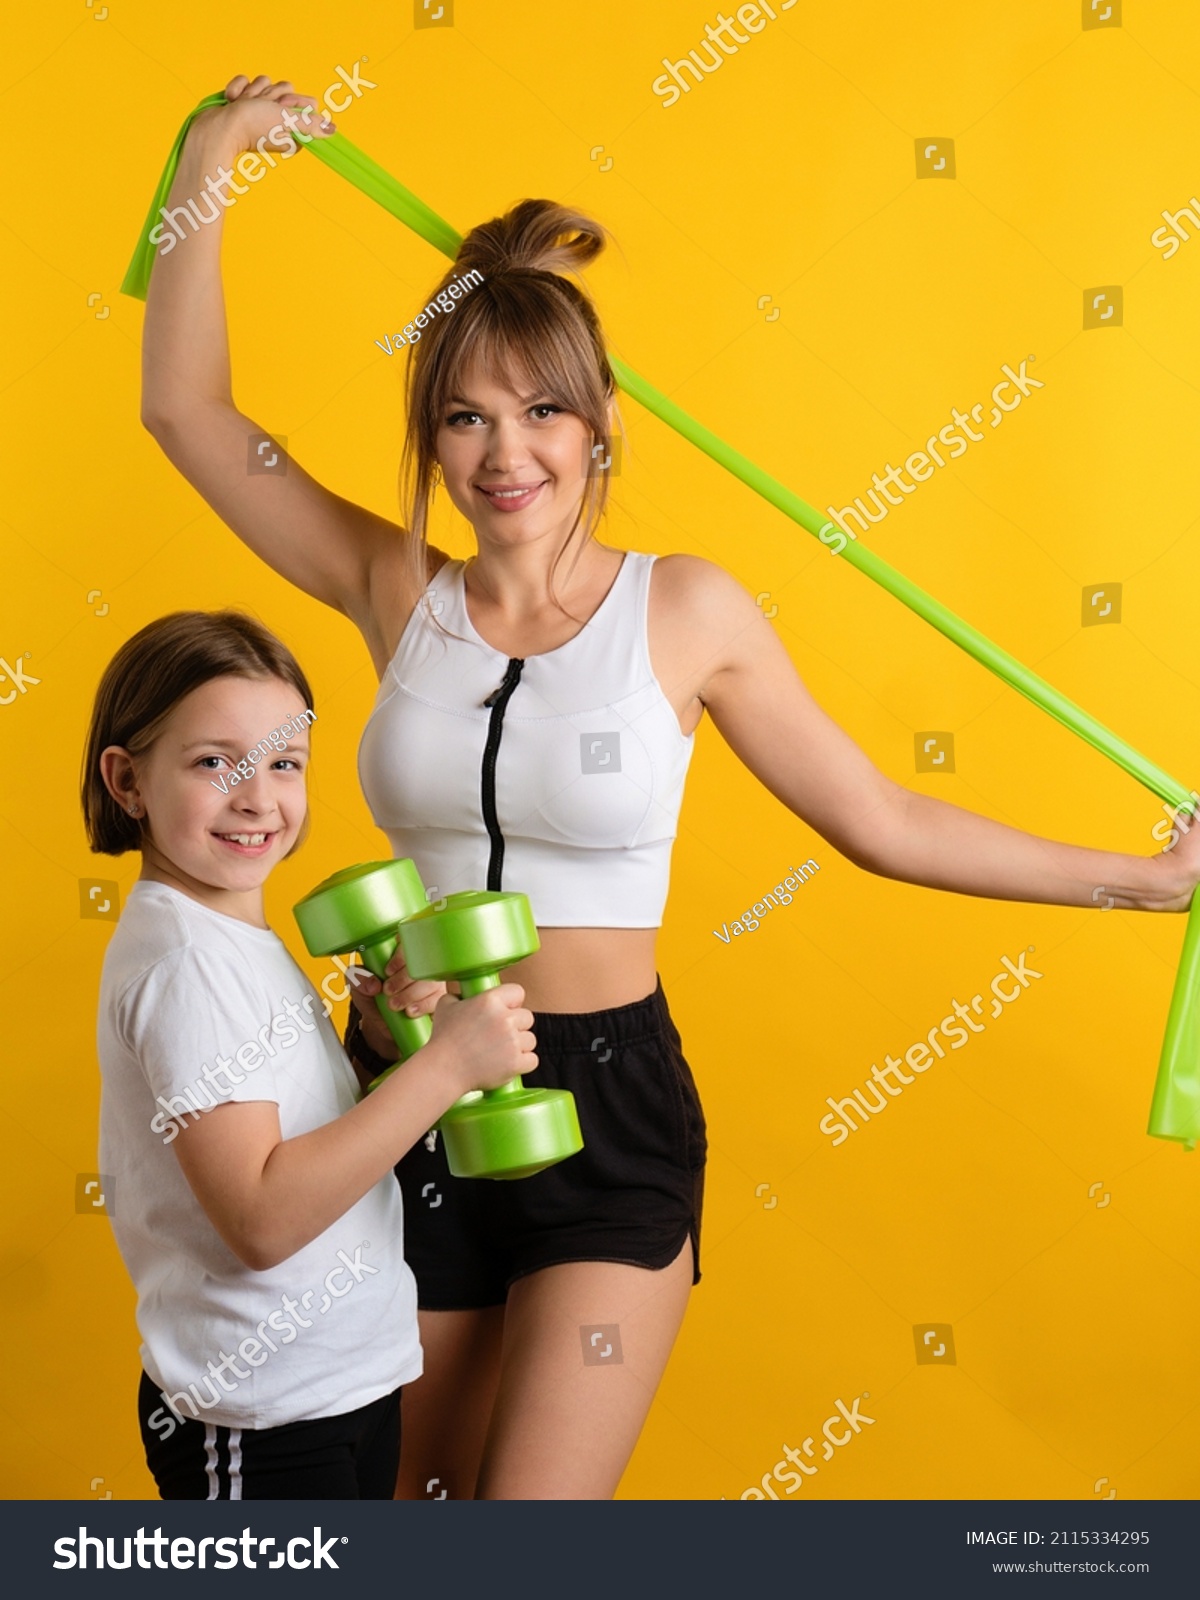 Healthy fit mom and daughter wearing sport wear in studio using resistive exercise band and dumbbells against yellow background. Active lifestyle. Sporty Family together online workouts at home. #2115334295